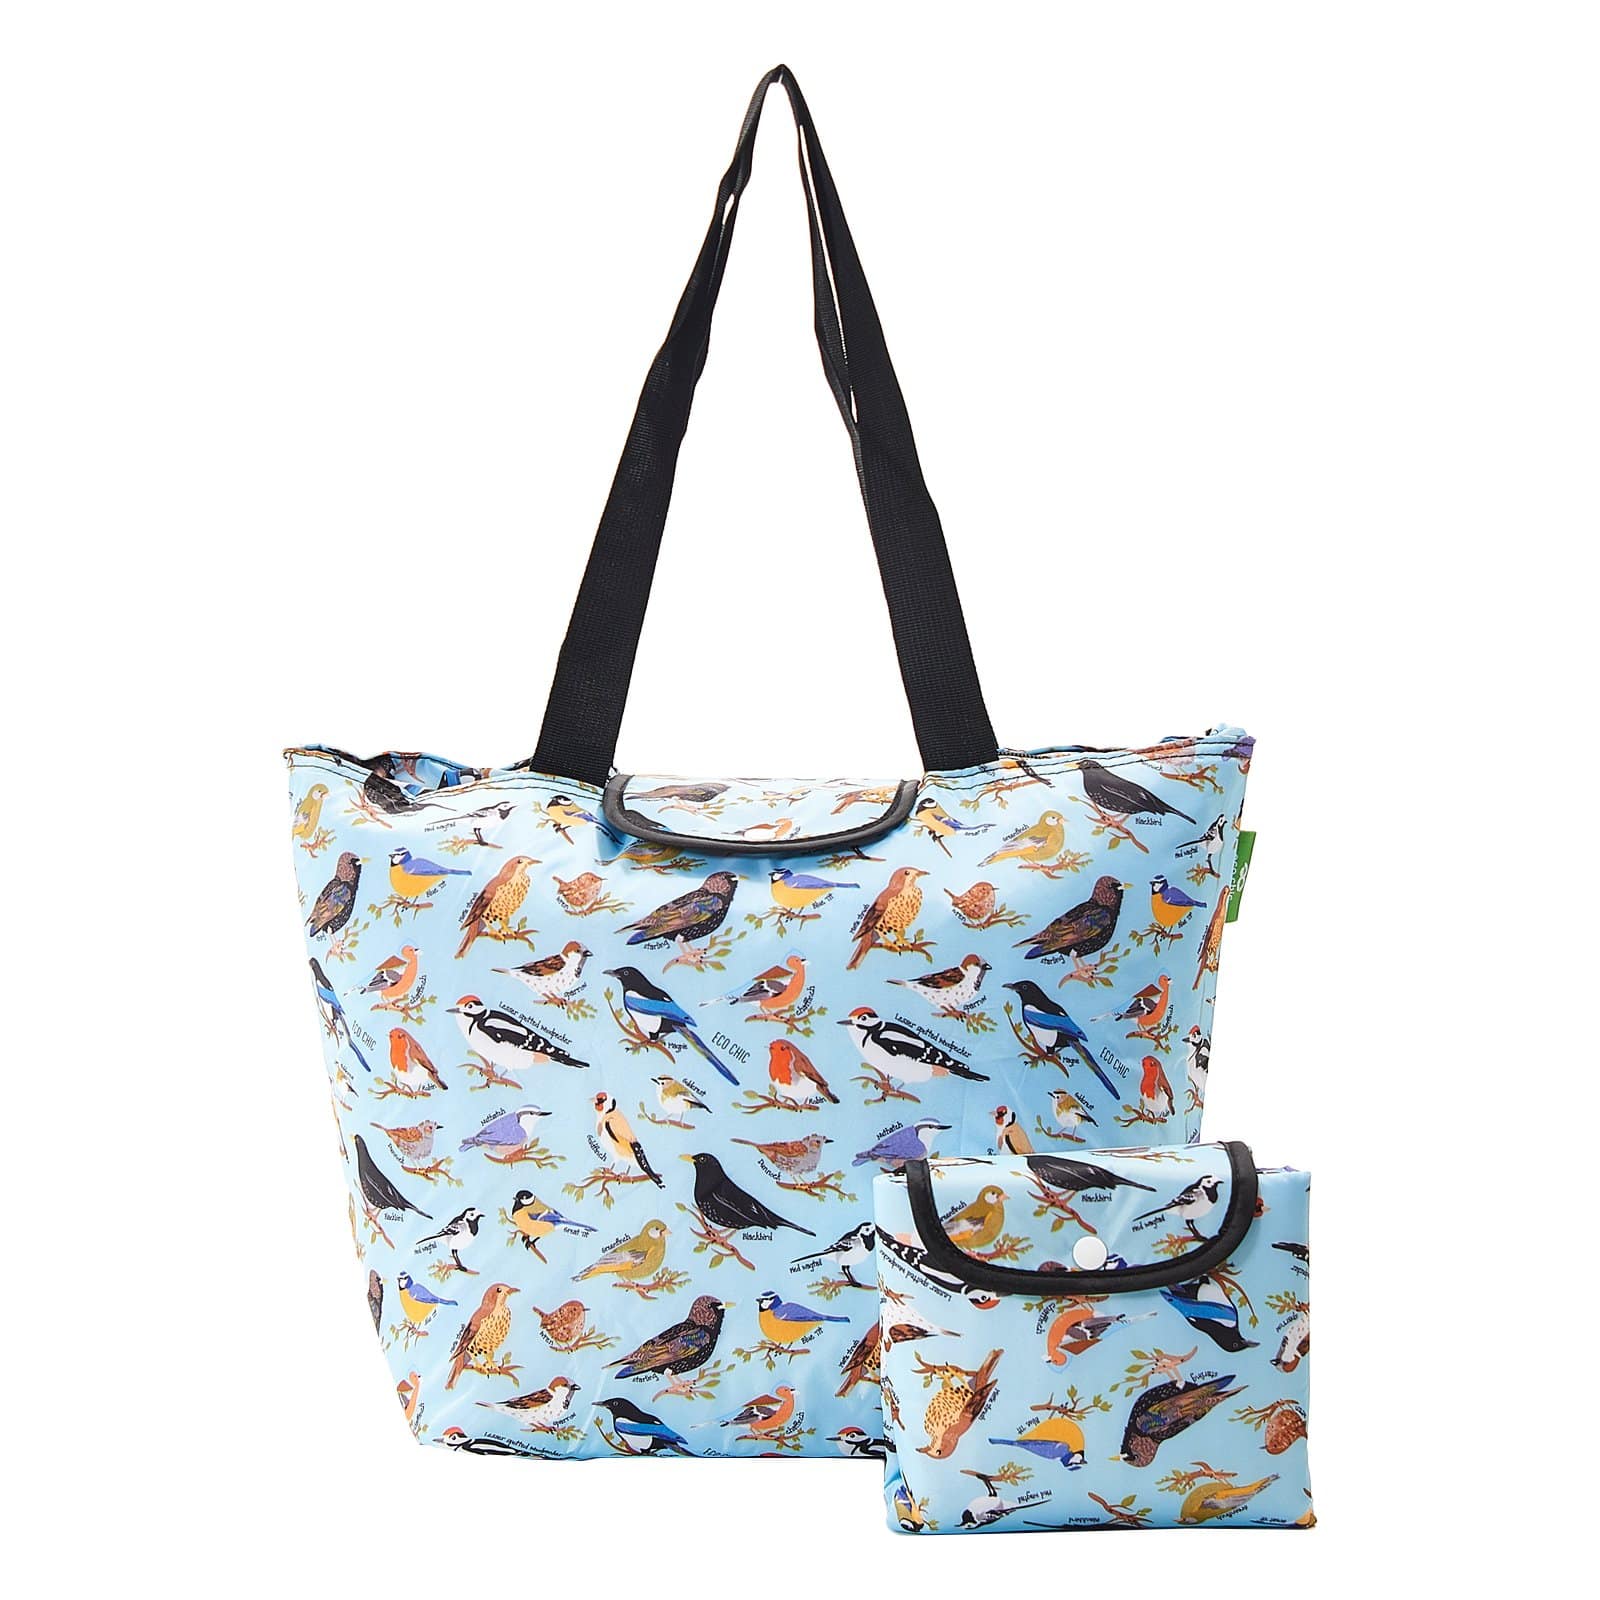 Eco Chic Blue Eco Chic Lightweight Foldable Picnic Cool Bag Wild Birds